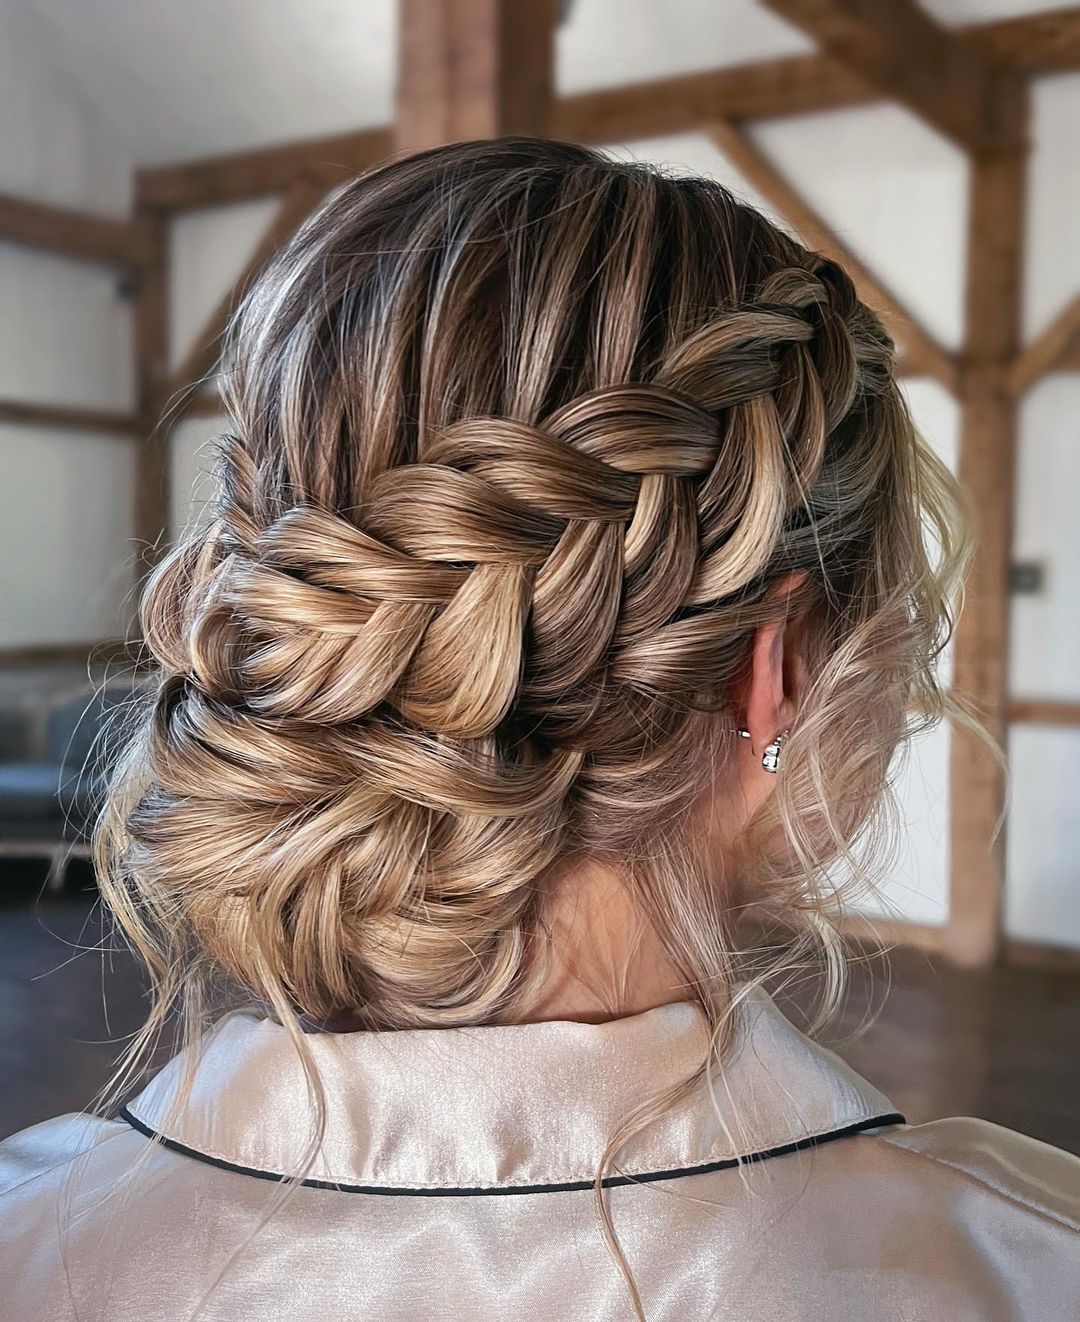 braided corwn updo hairstyle for bridesmaid via hairupdos.by.jocelyn